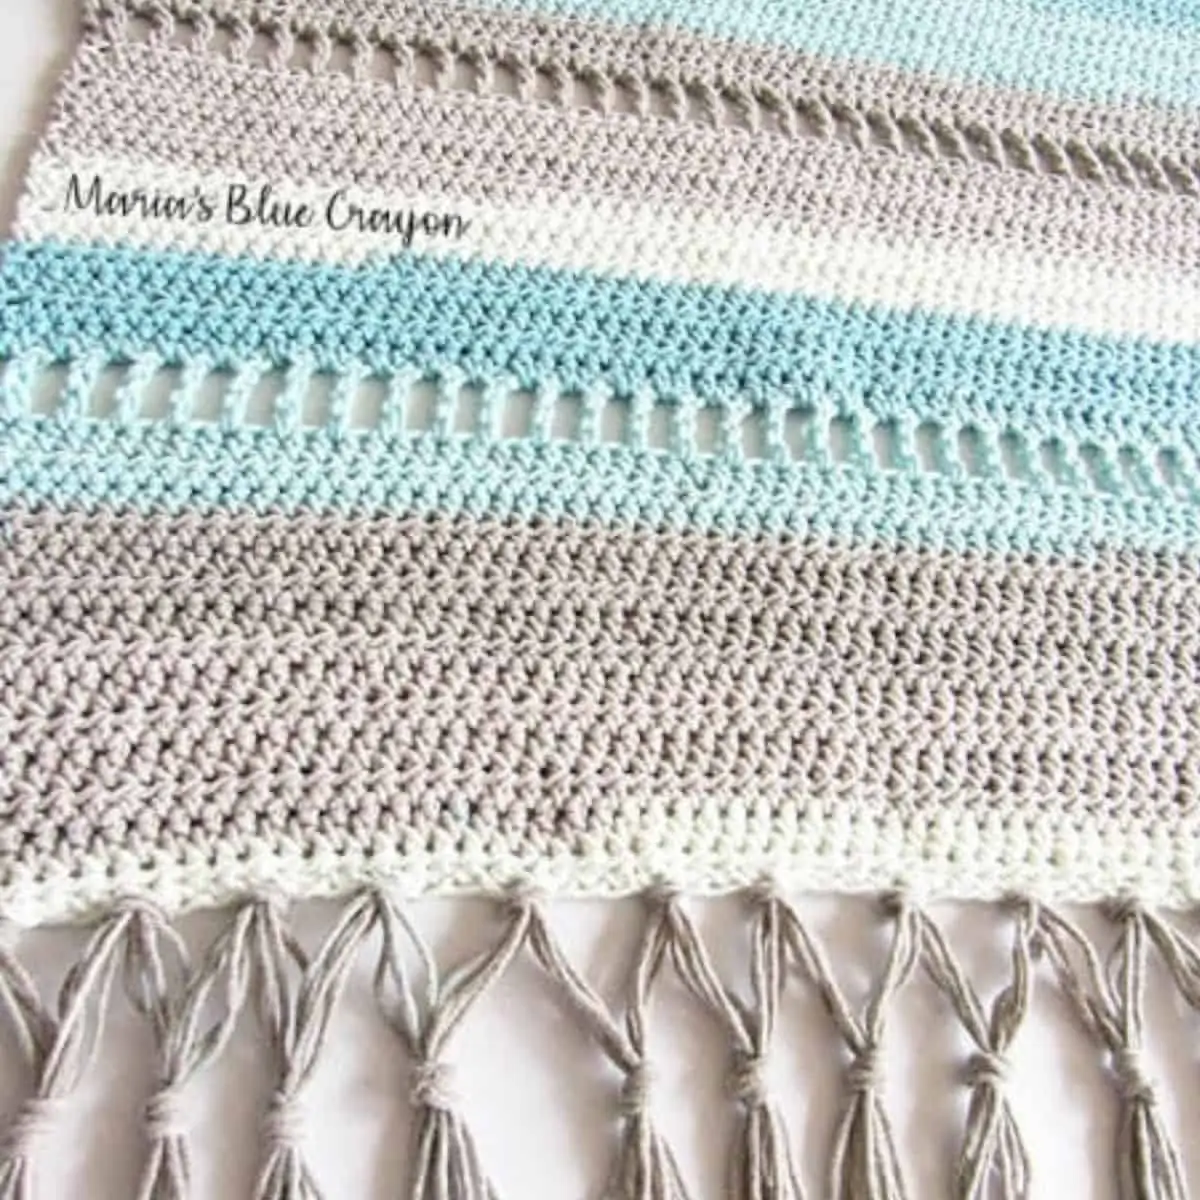 close up of gray, tan, light blue striped crochet rug with fringe